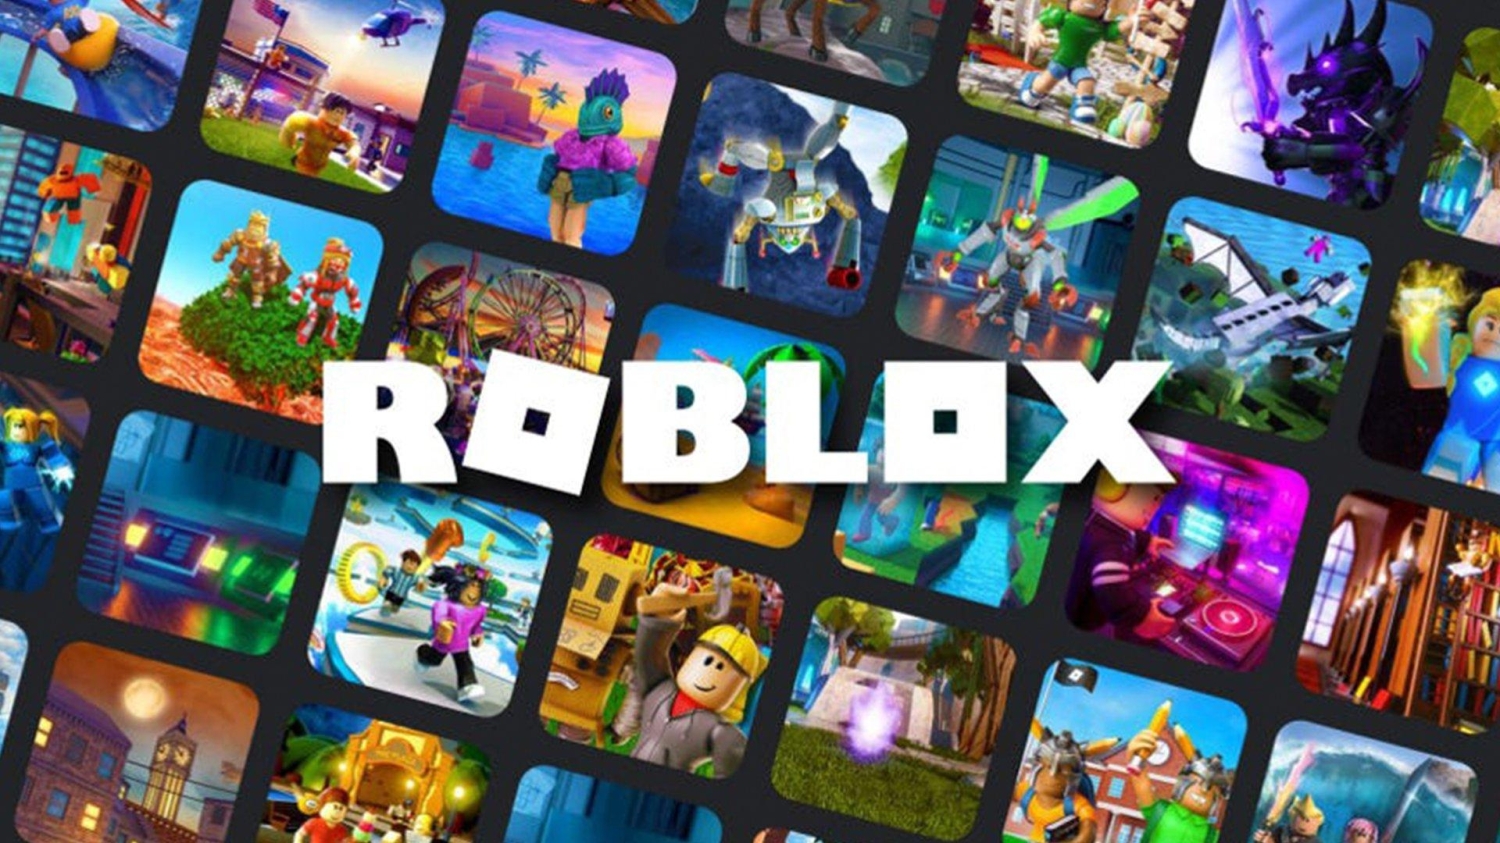 Roblox: Image Gallery (List View)